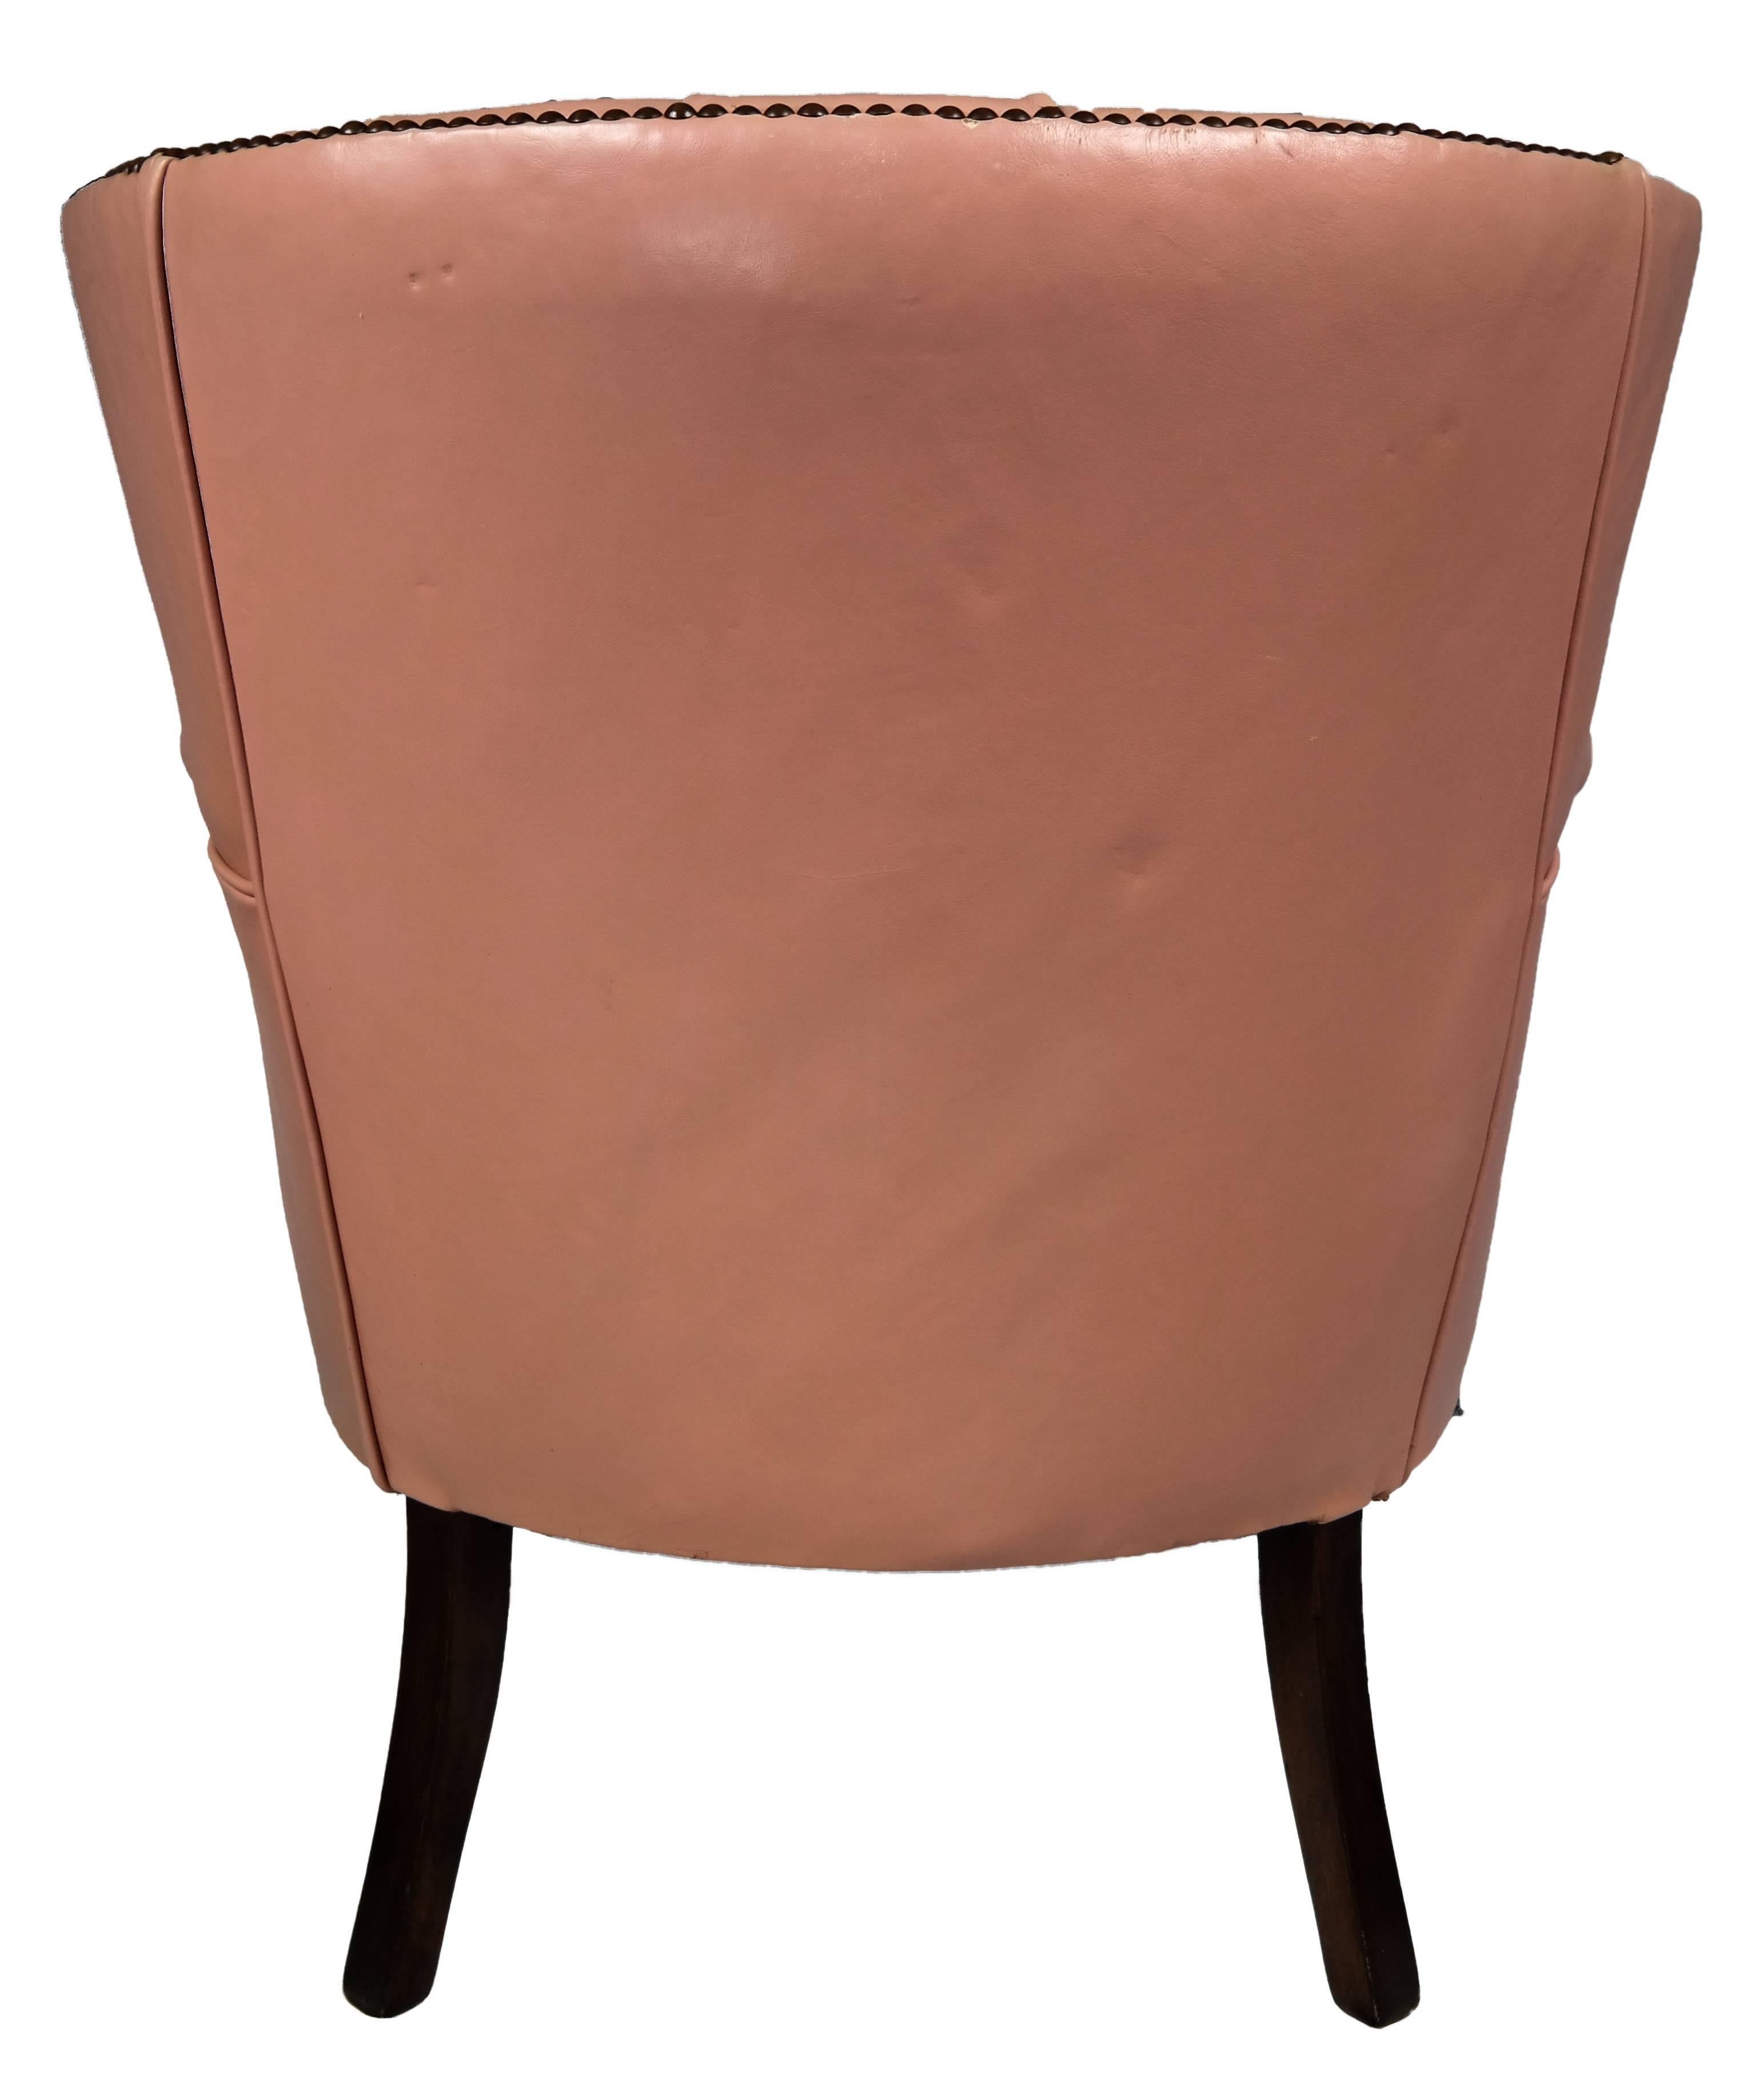 American Midcentury Tufted Leather Armchair